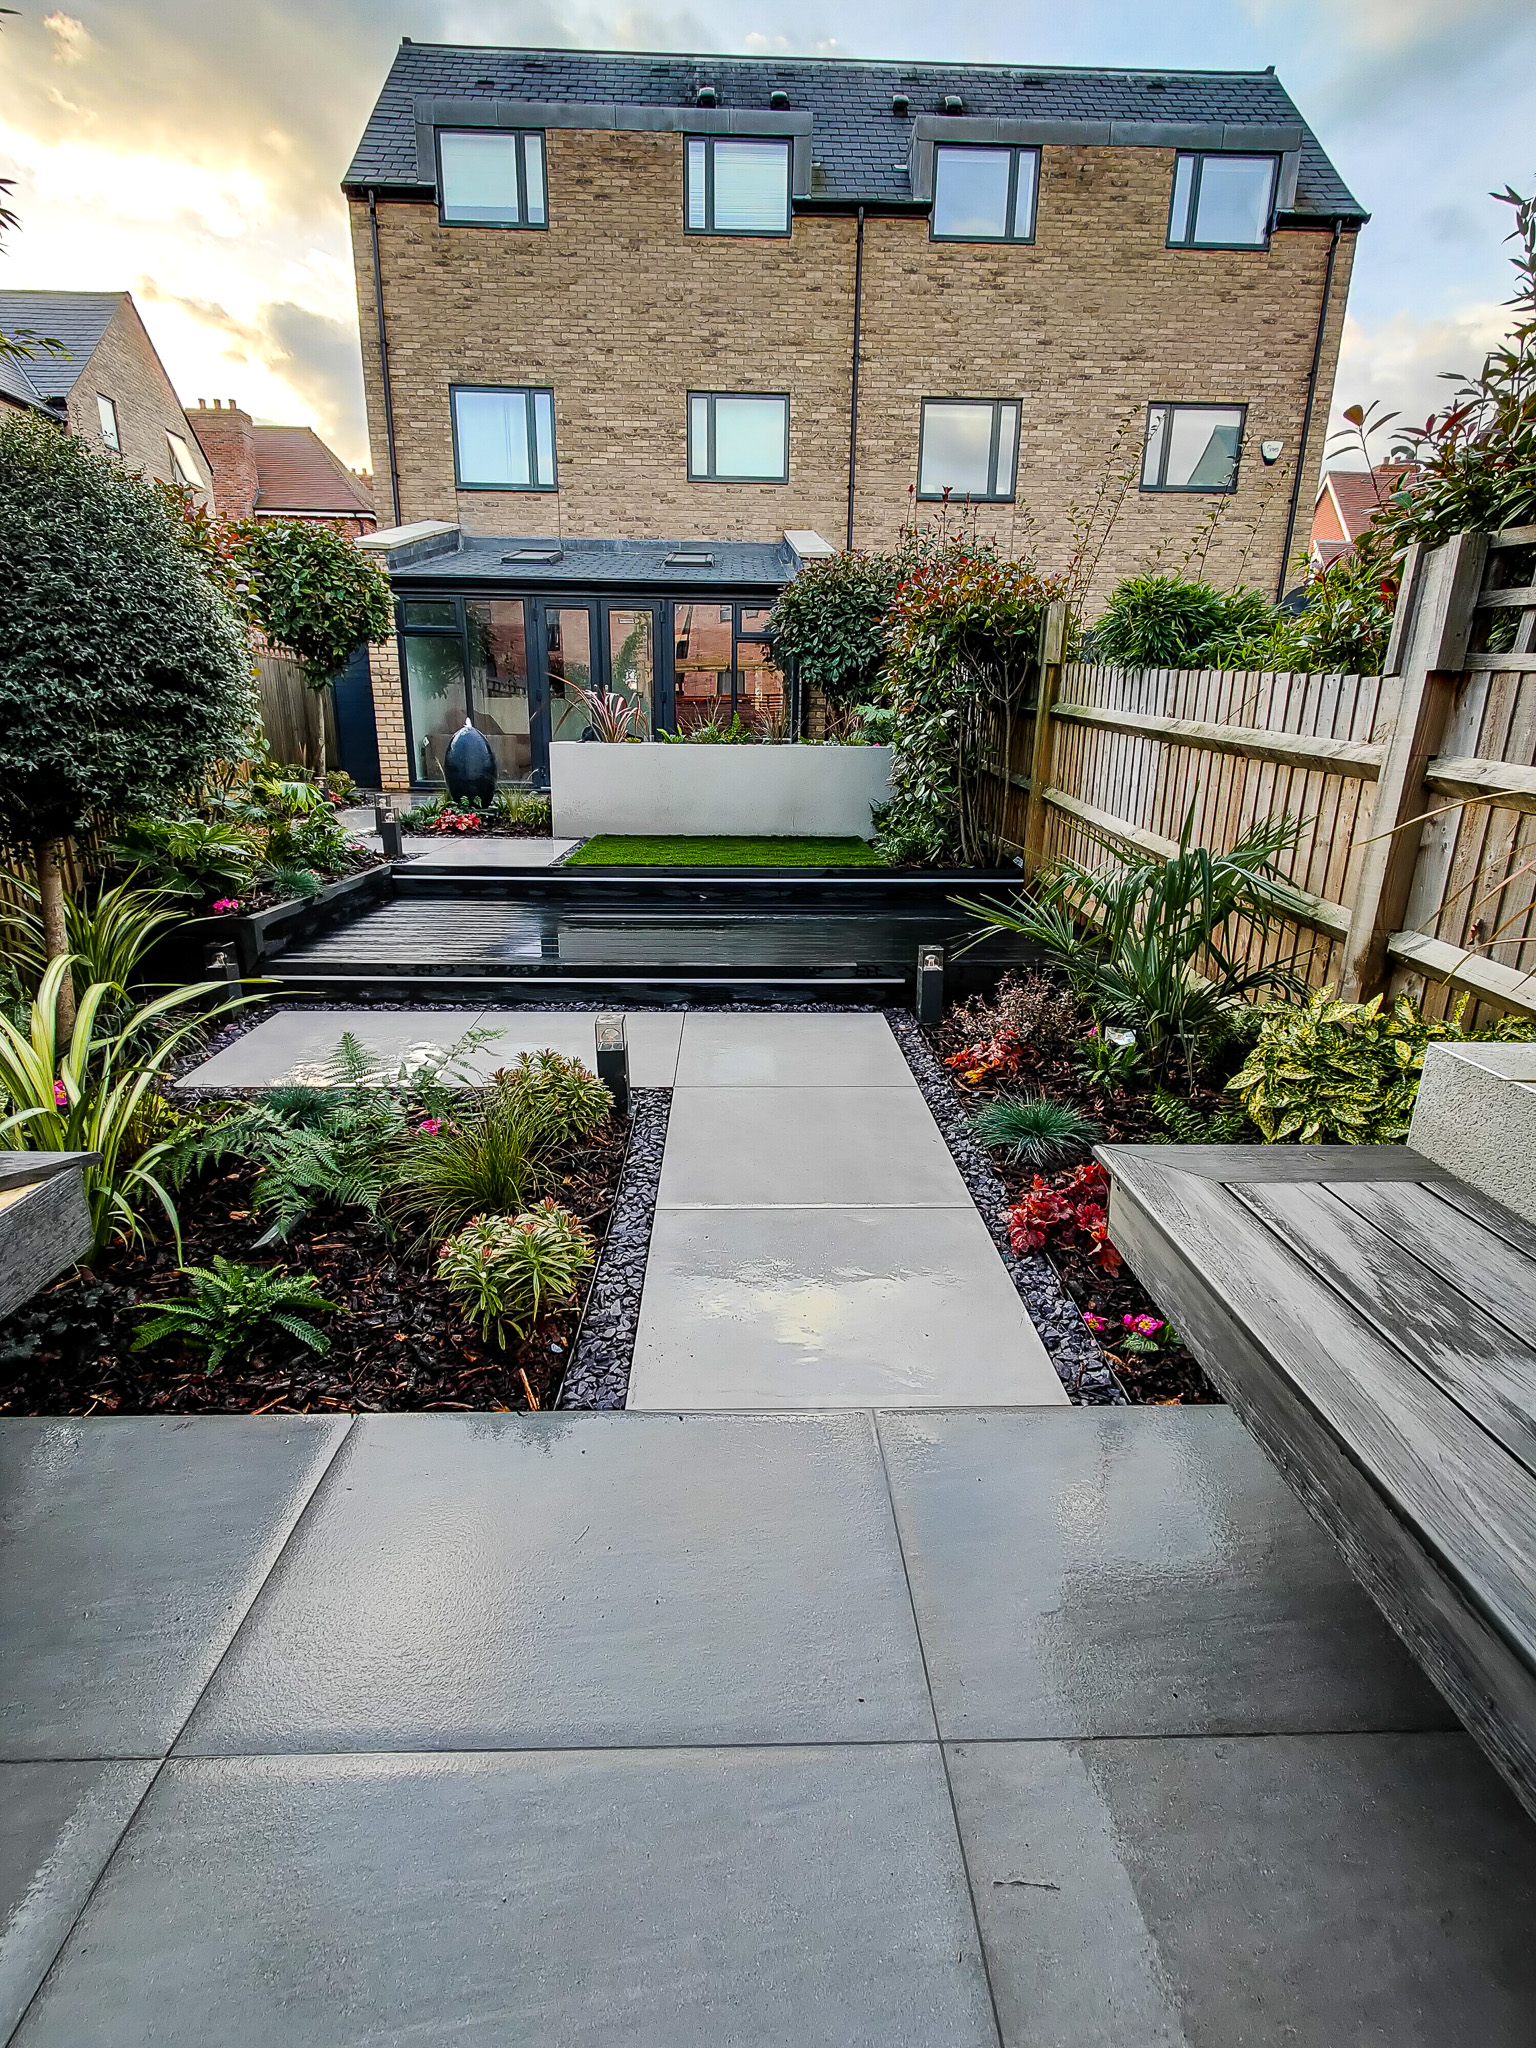 New build garden design in Mill Hill, designed by a Crystal Palace garden designer